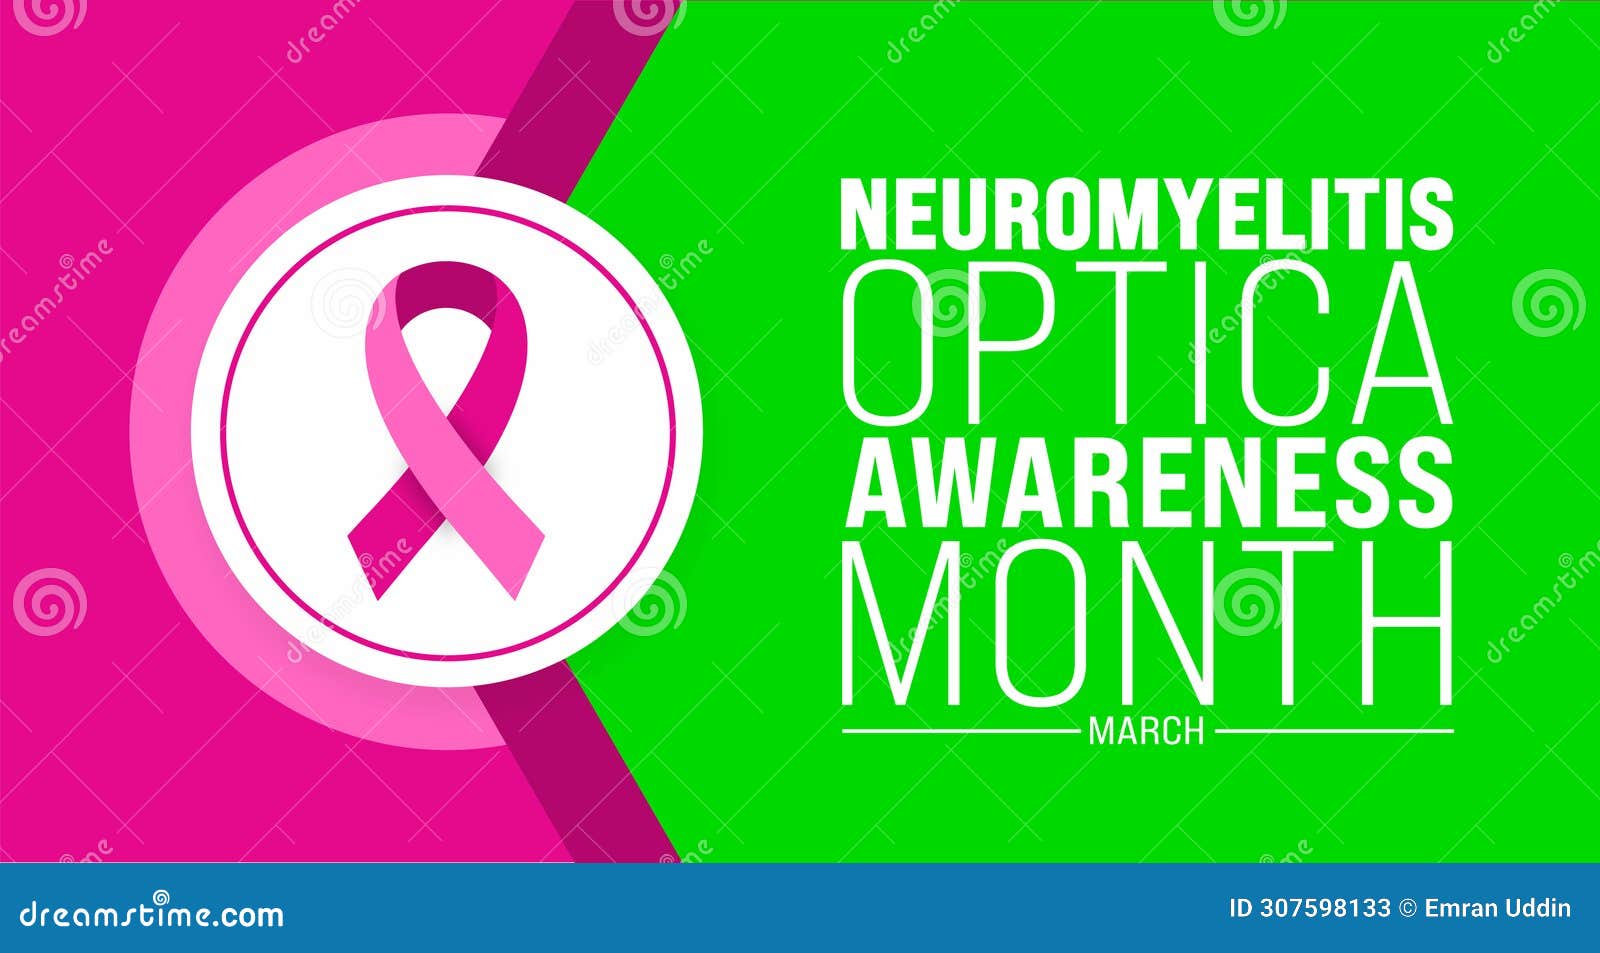 march is neuromyelitis optica awareness month background template. holiday concept. use to background